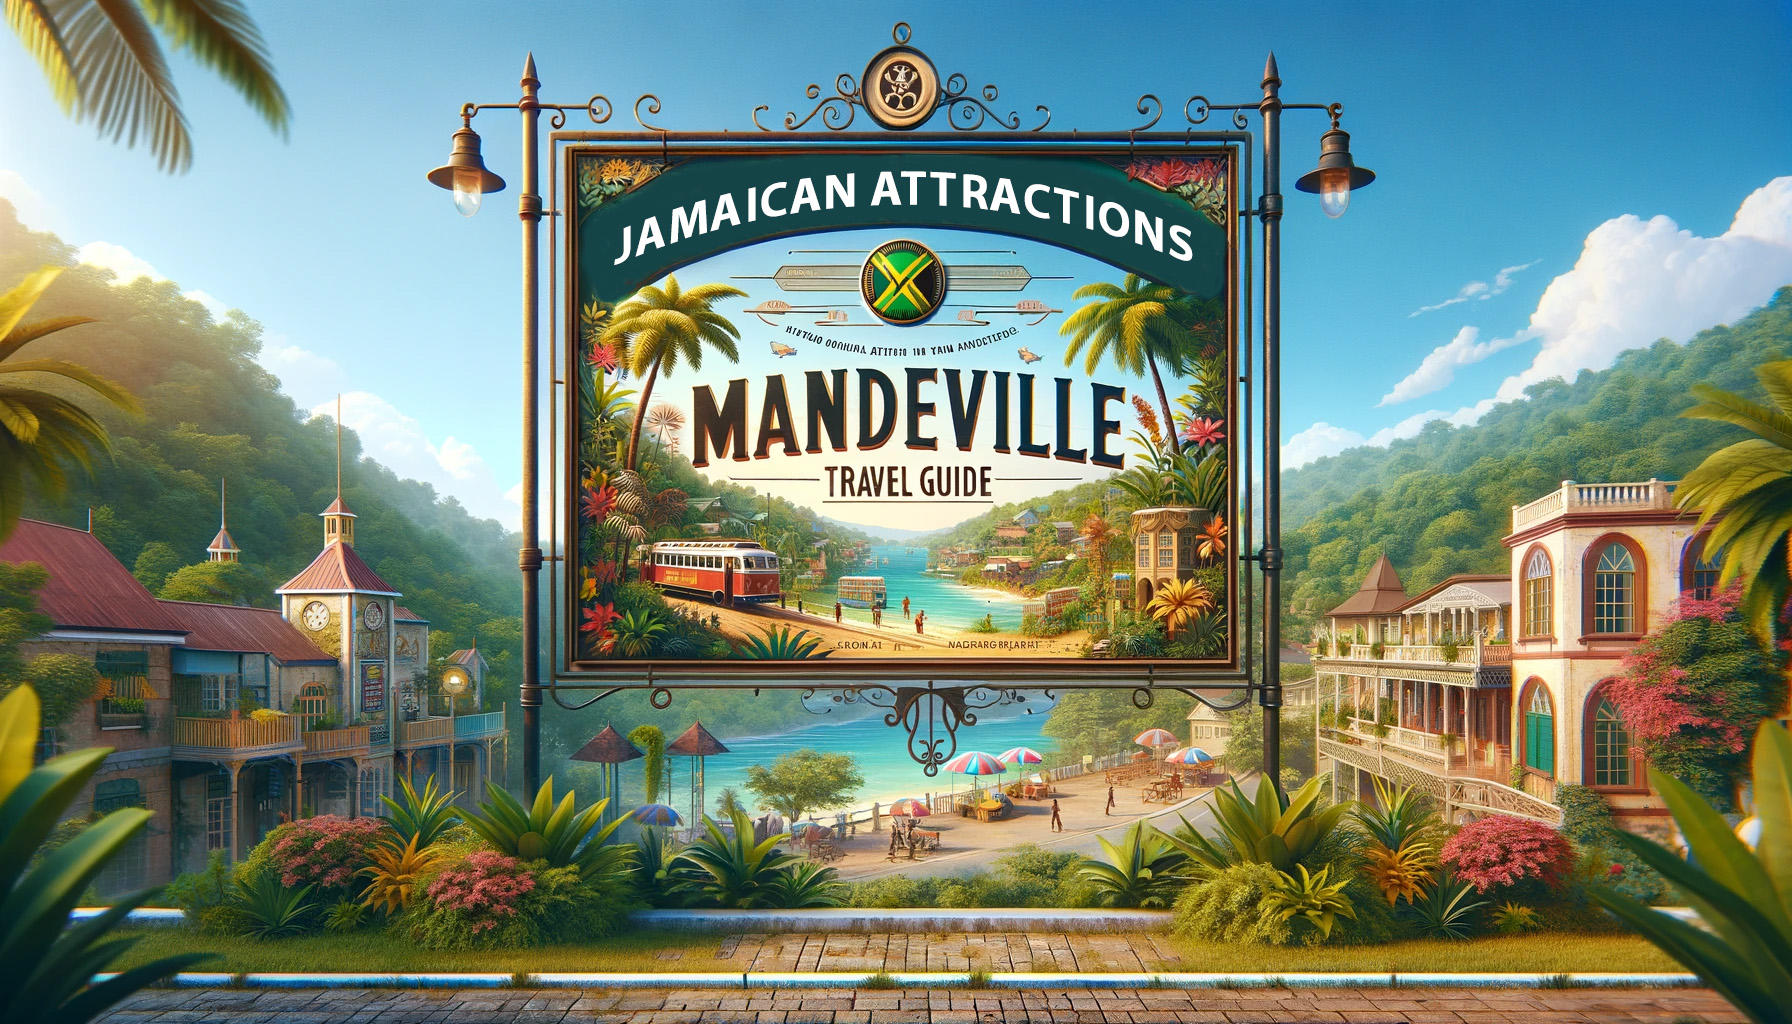 Jamaican Attractions - Mandeville Travel Guide